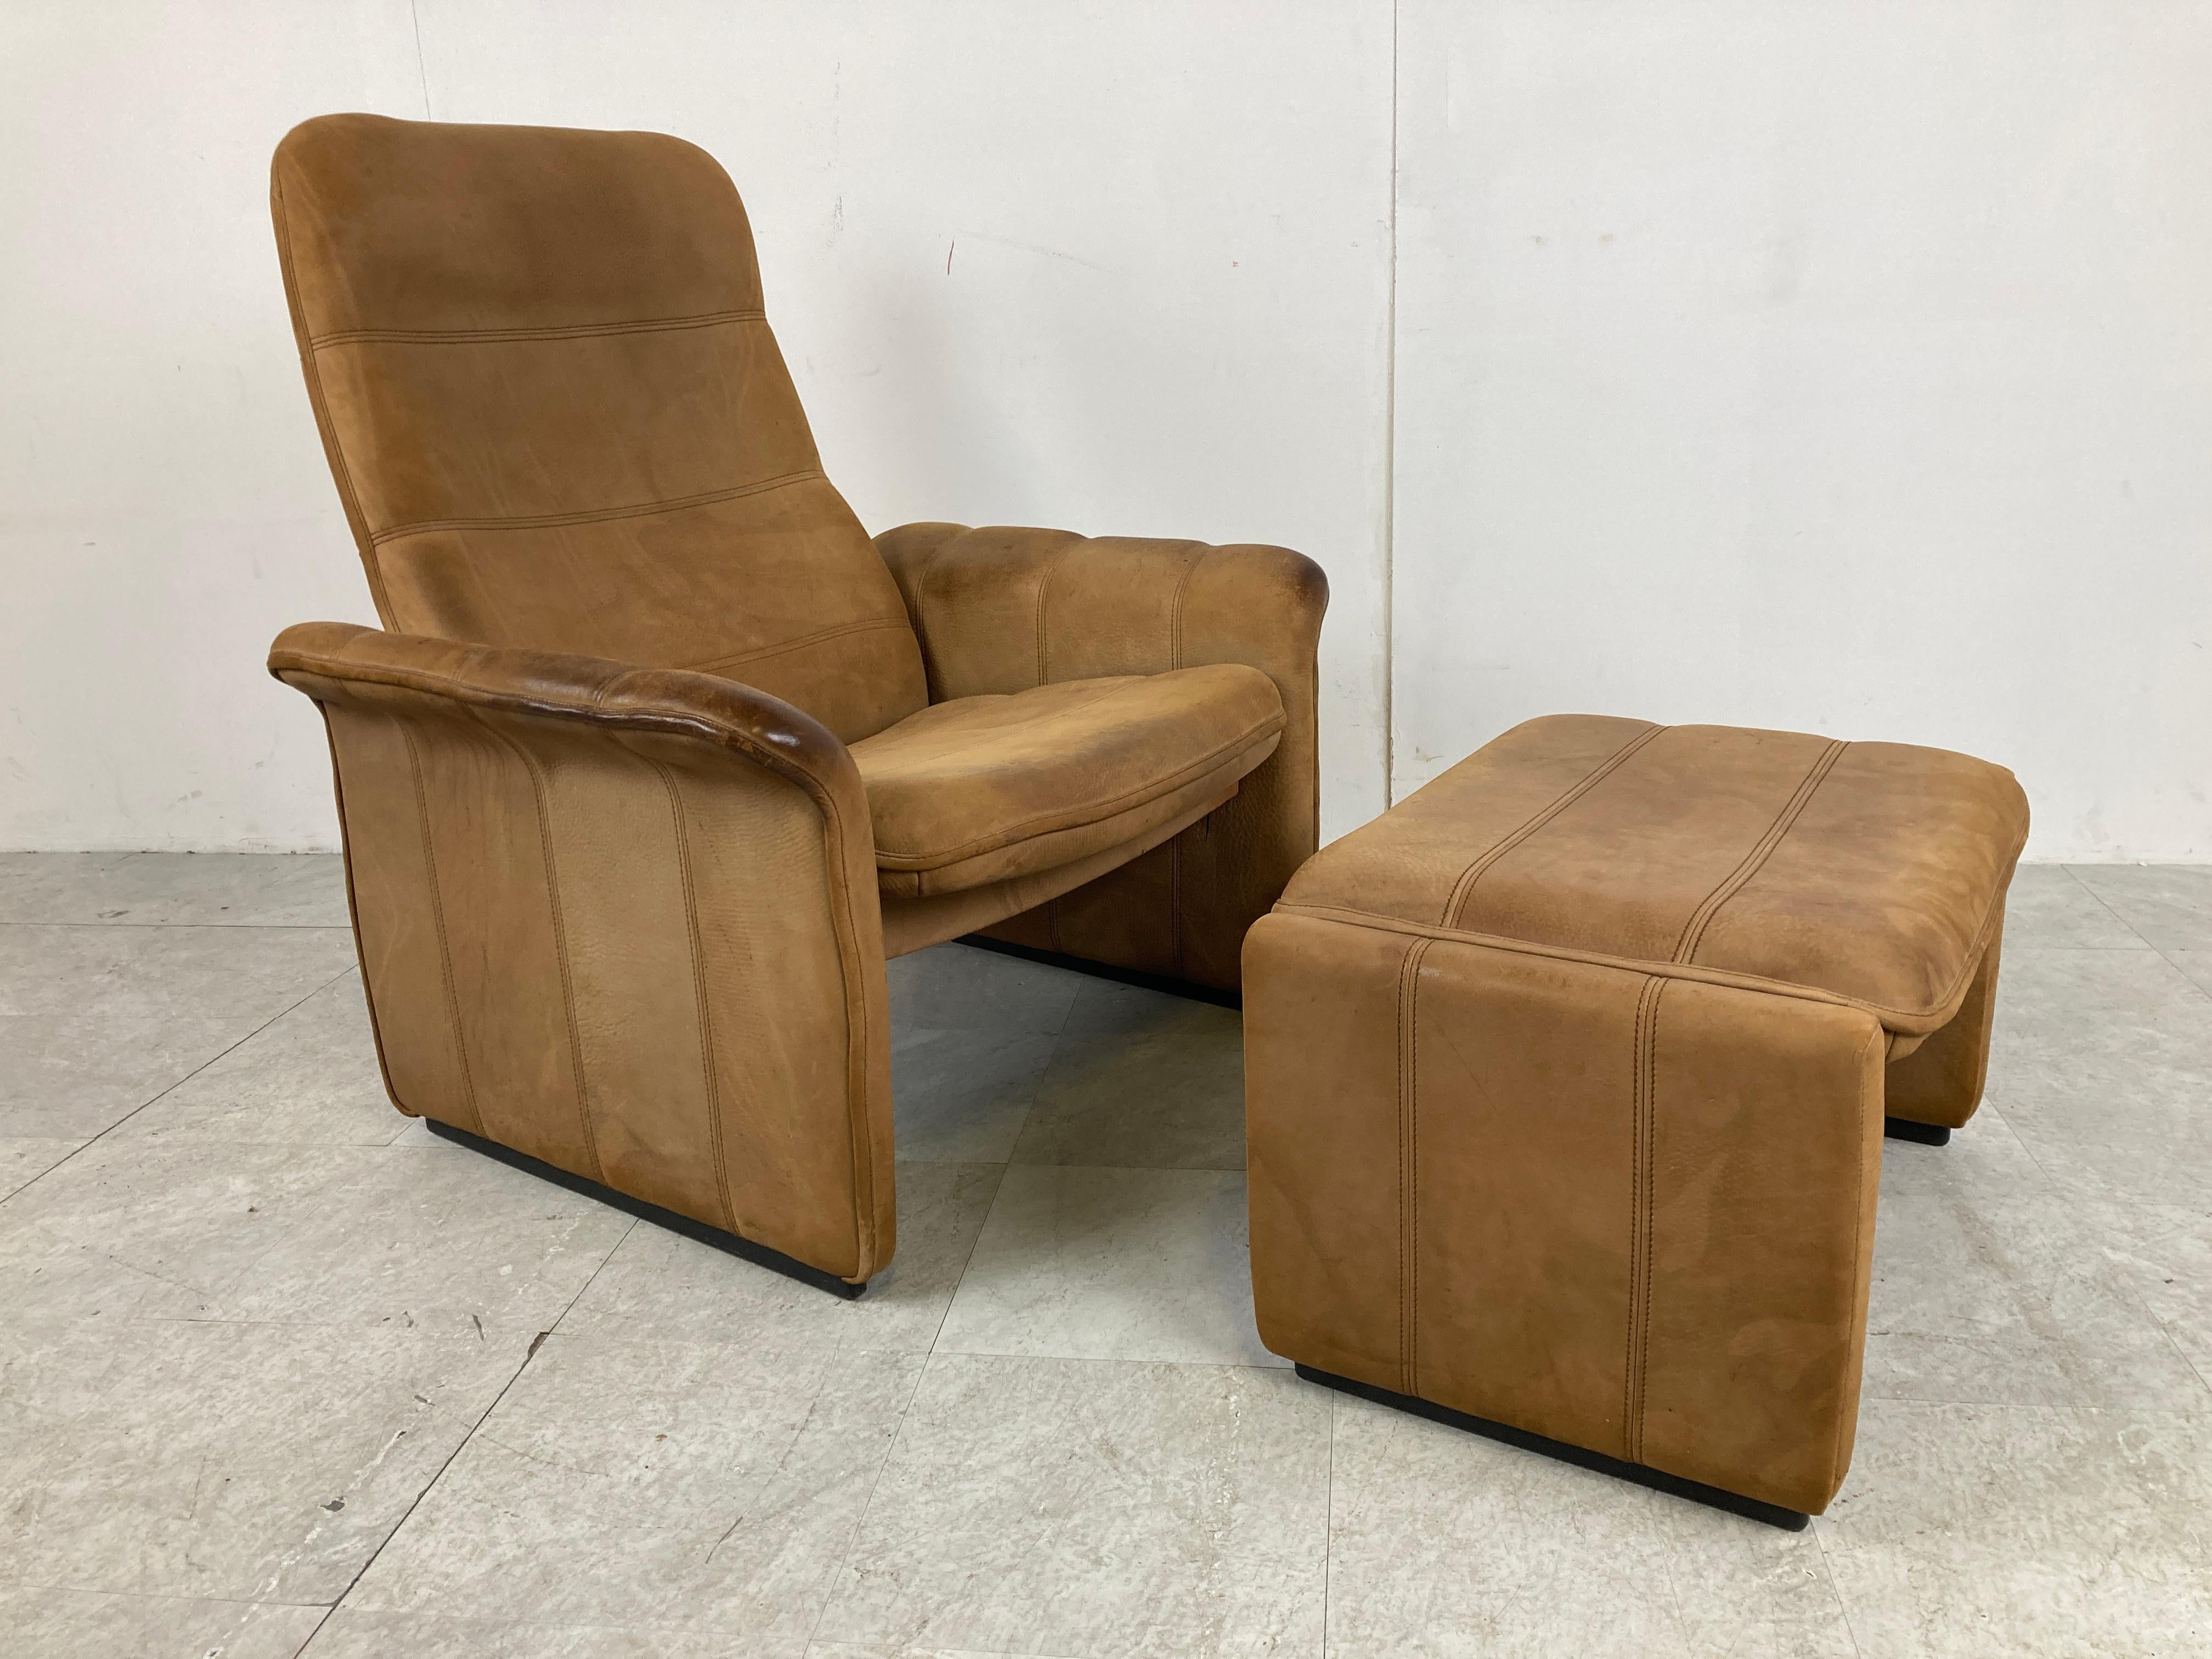 Vintage Ds 50 Leather Lounge Chair and Ottoman by De Sede, 1970s For Sale 1